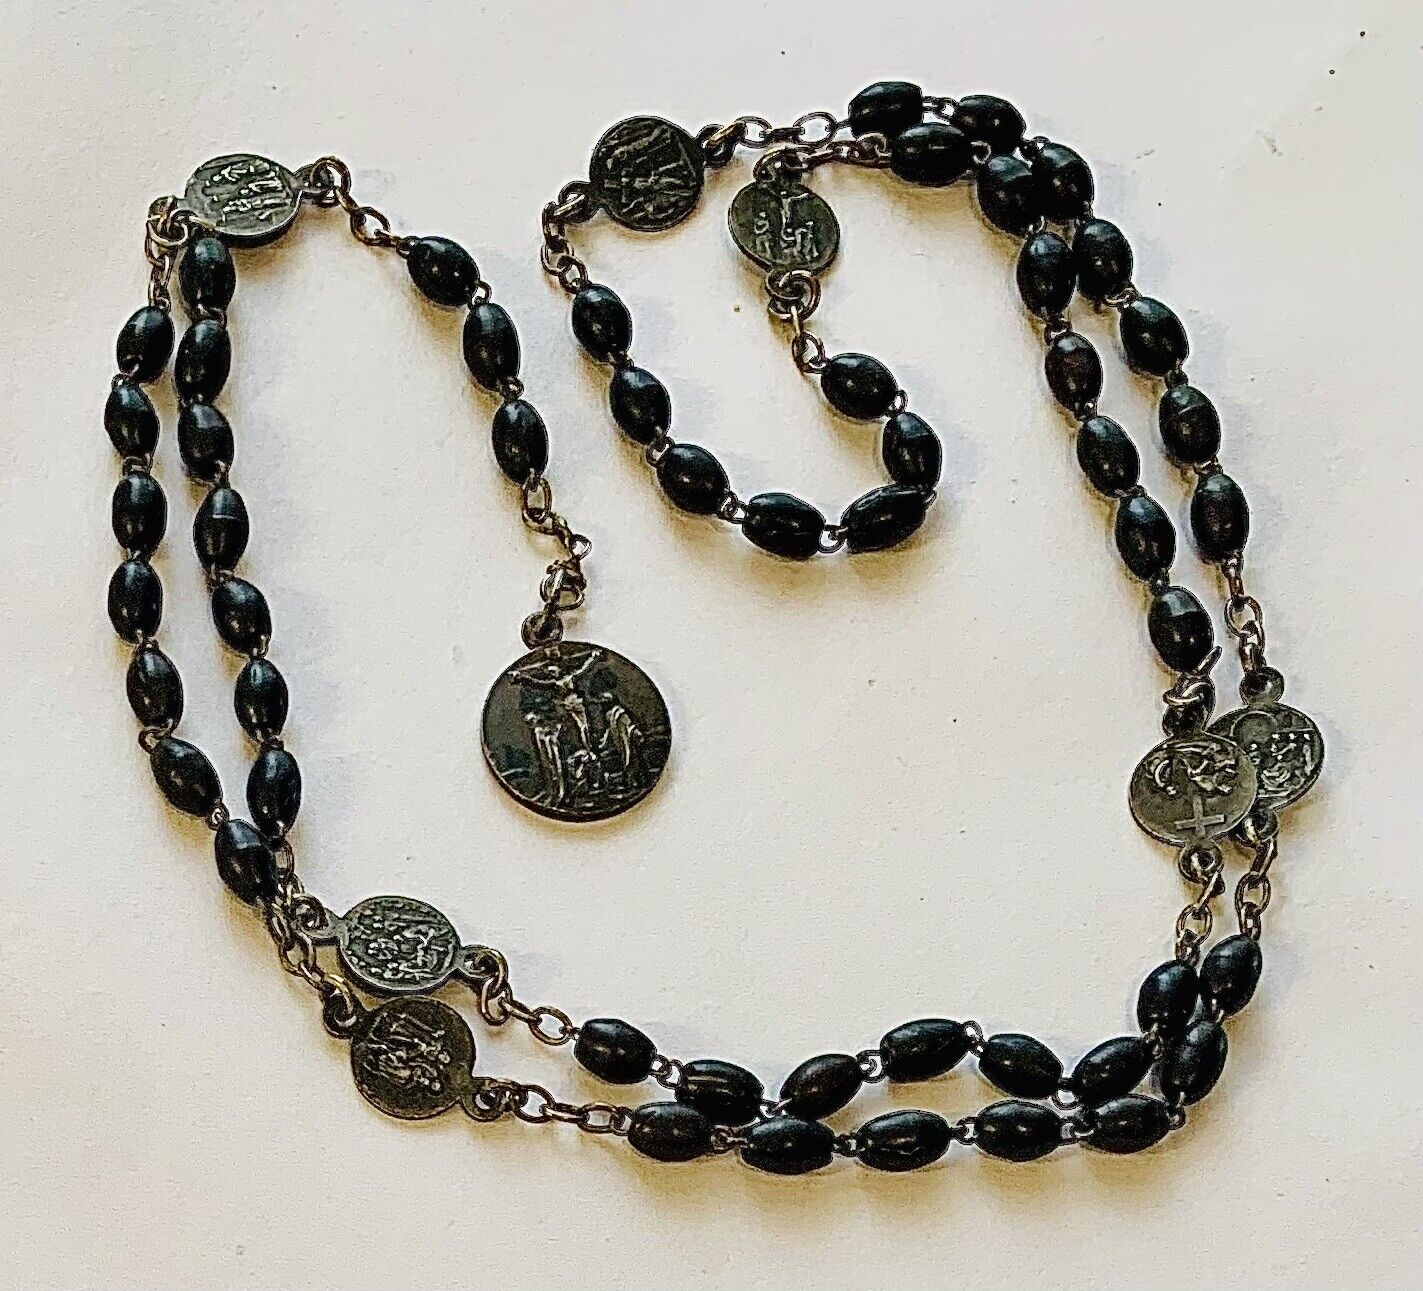 Refurbished Antique/Vintage Catholic Servite Rosary Seven Sorrows Of Our Lady